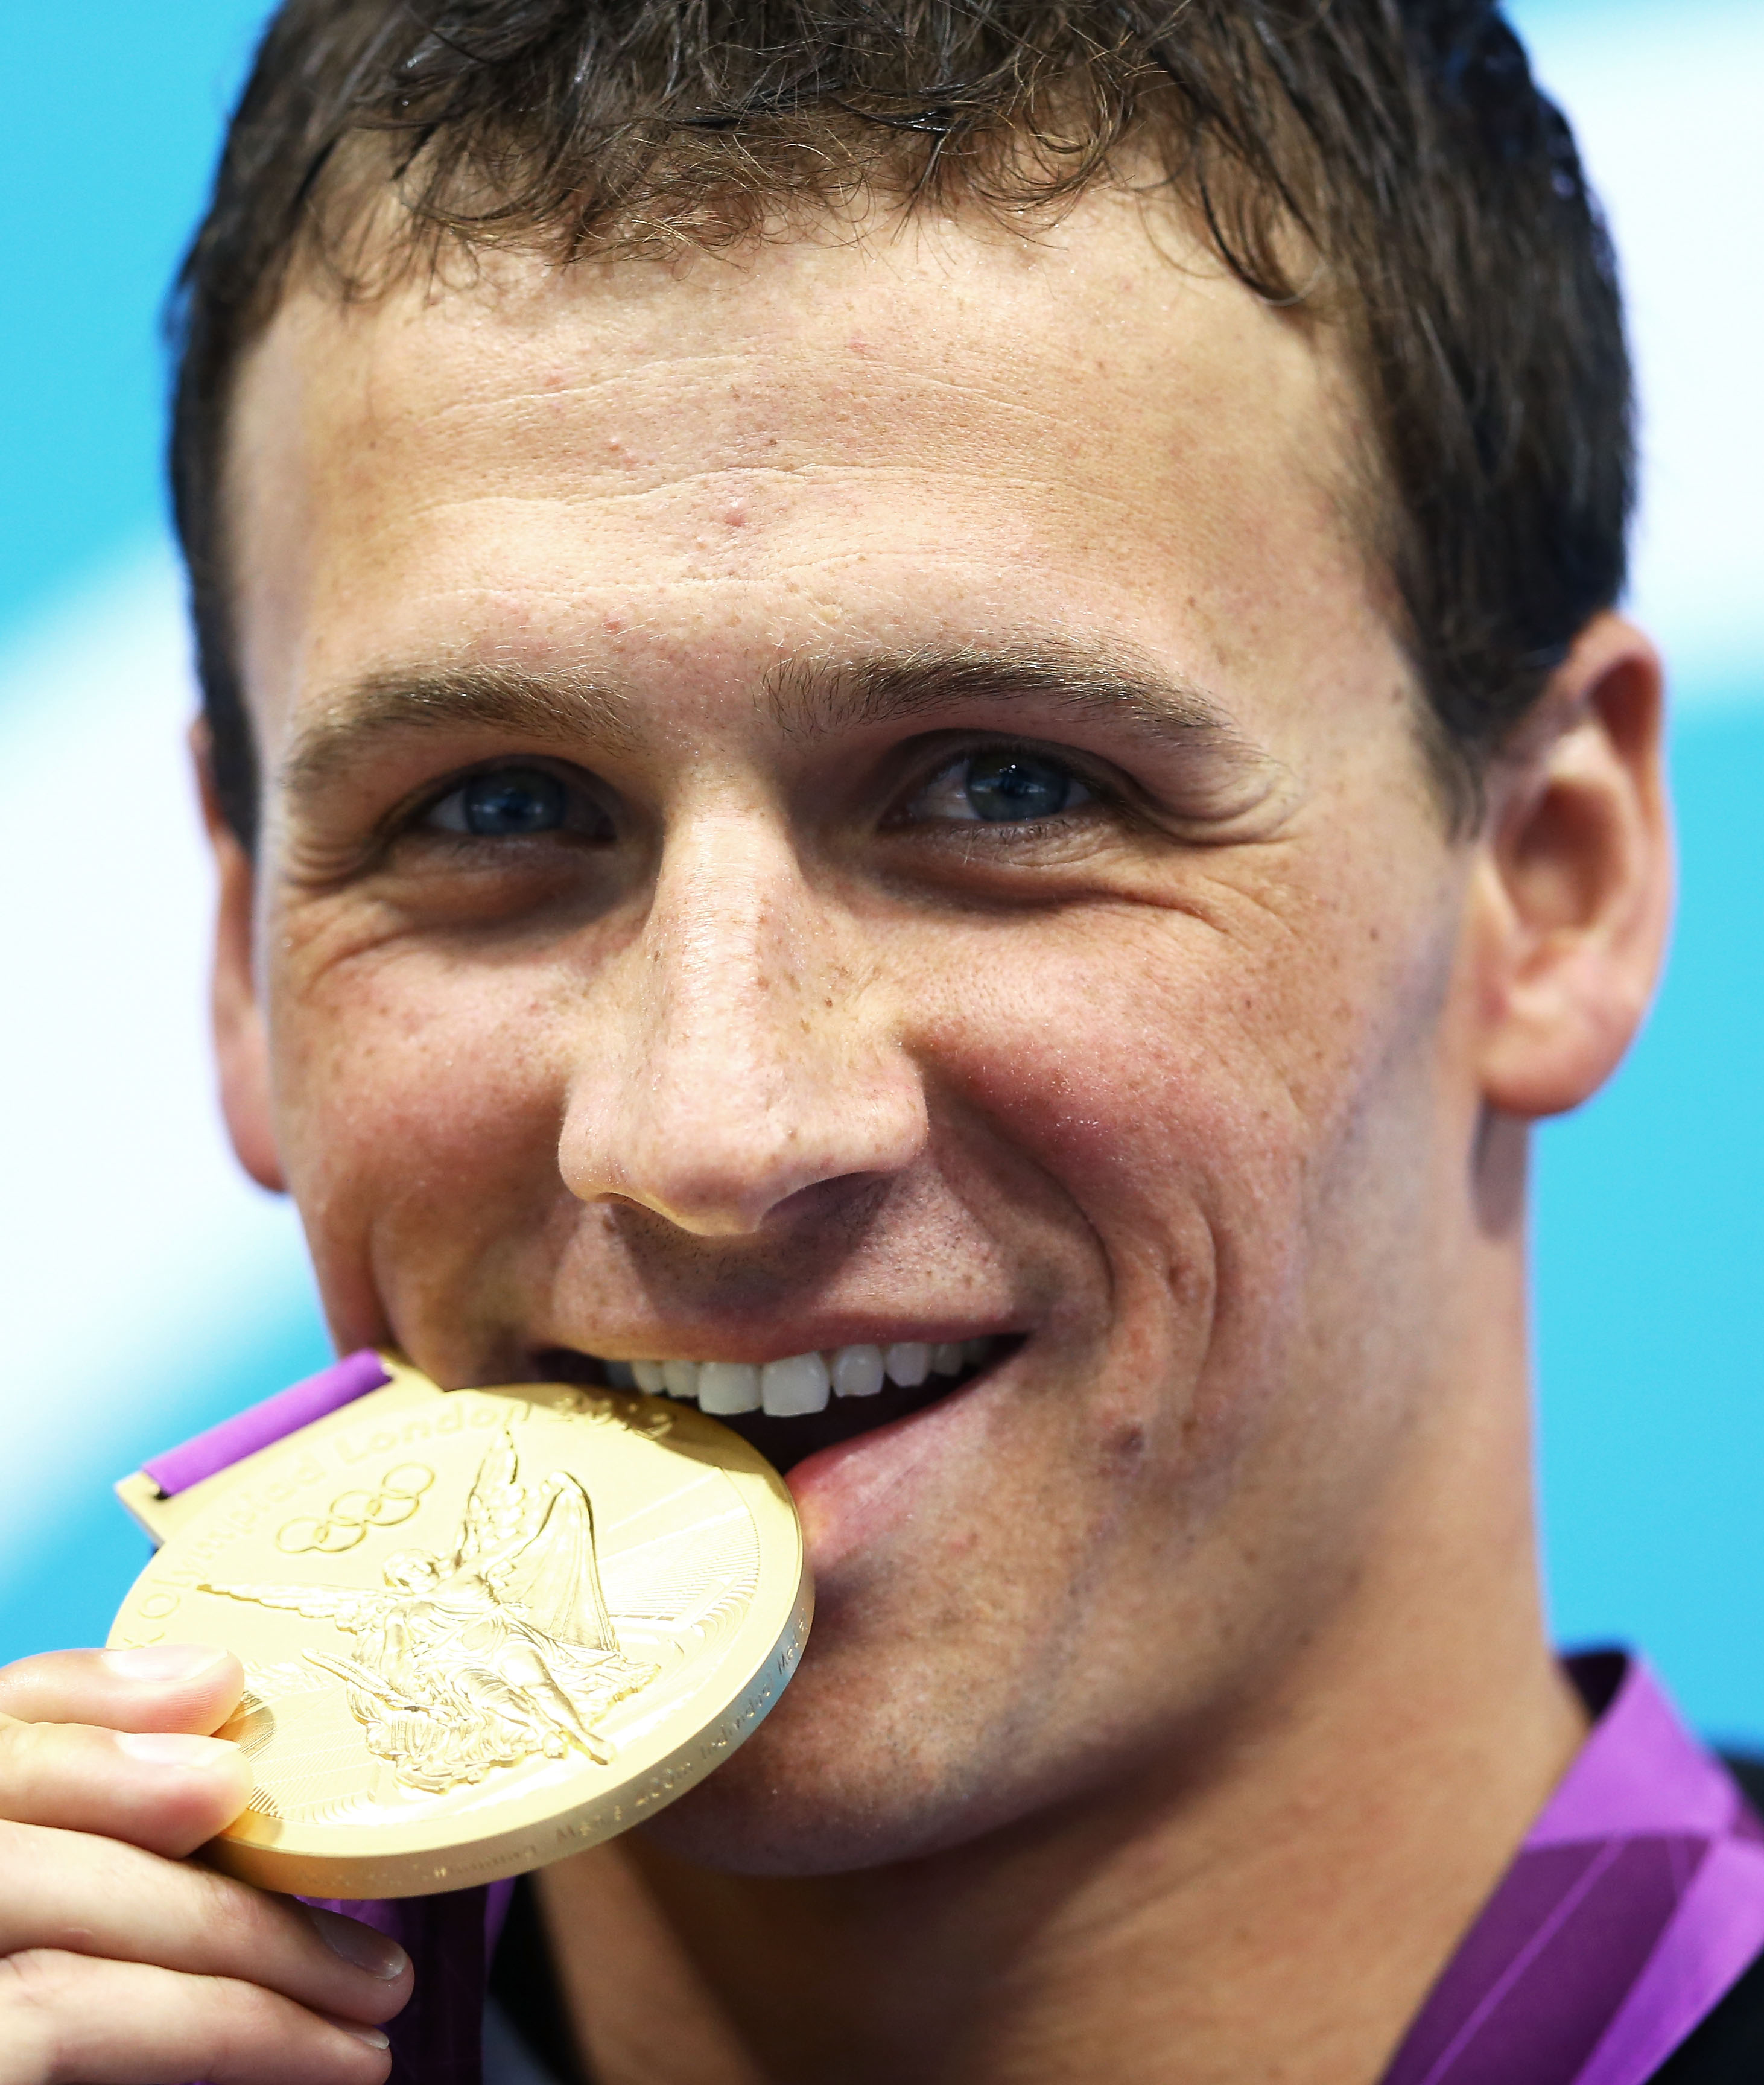 Ryan bit his gold medal during last Summer&#39;s Olympics. - Ryan-bit-his-gold-medal-during-last-Summer-Olympics